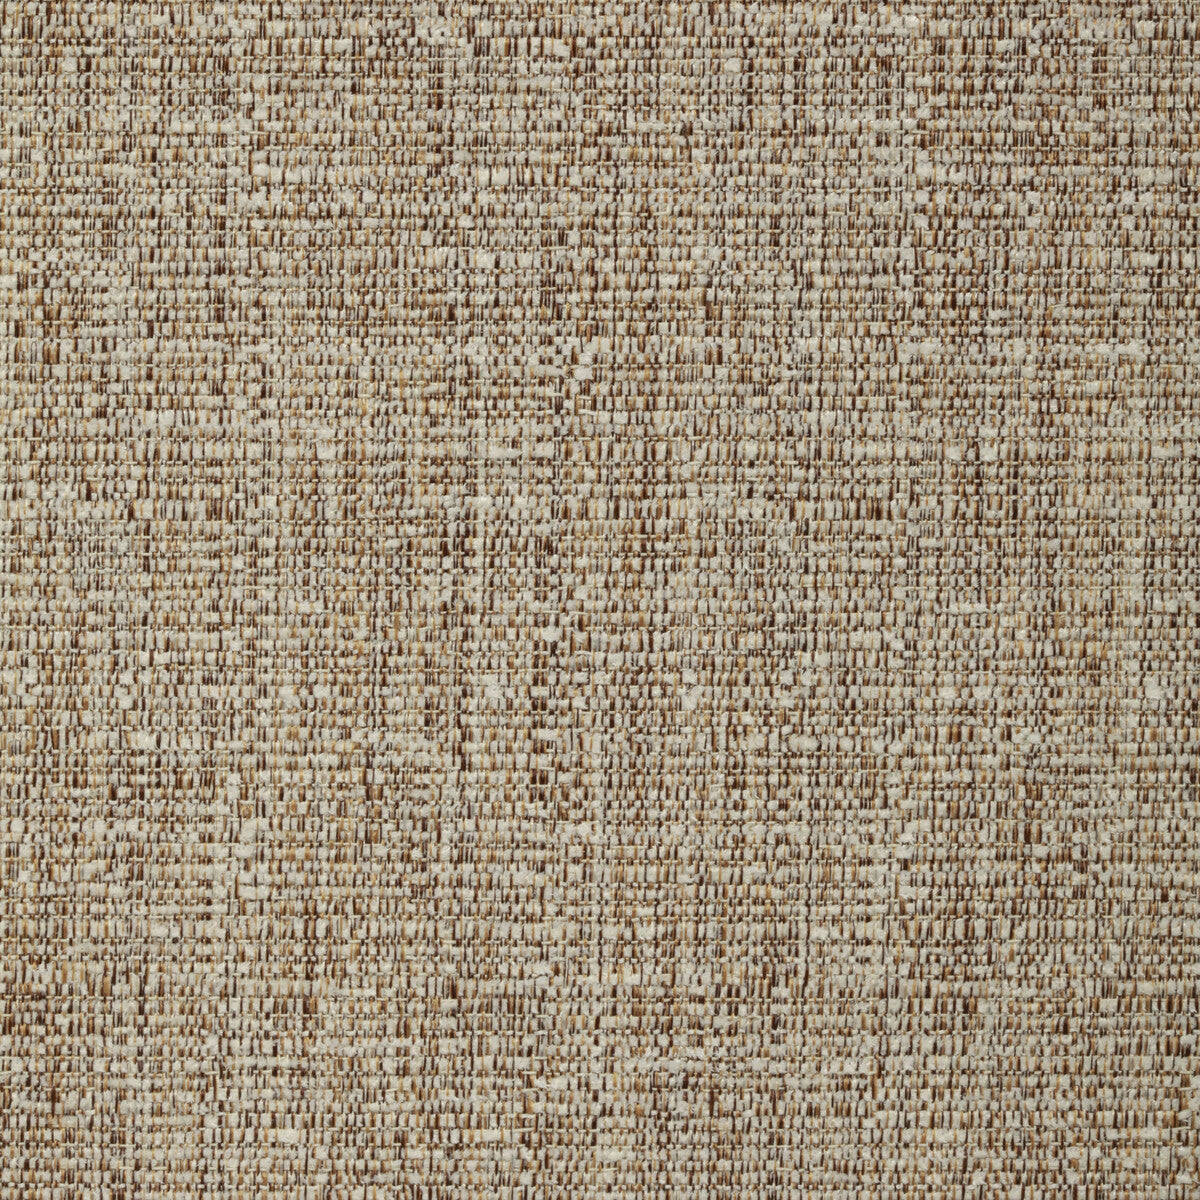 Kravet Smart fabric in 35127-16 color - pattern 35127.16.0 - by Kravet Smart in the Performance Crypton Home collection